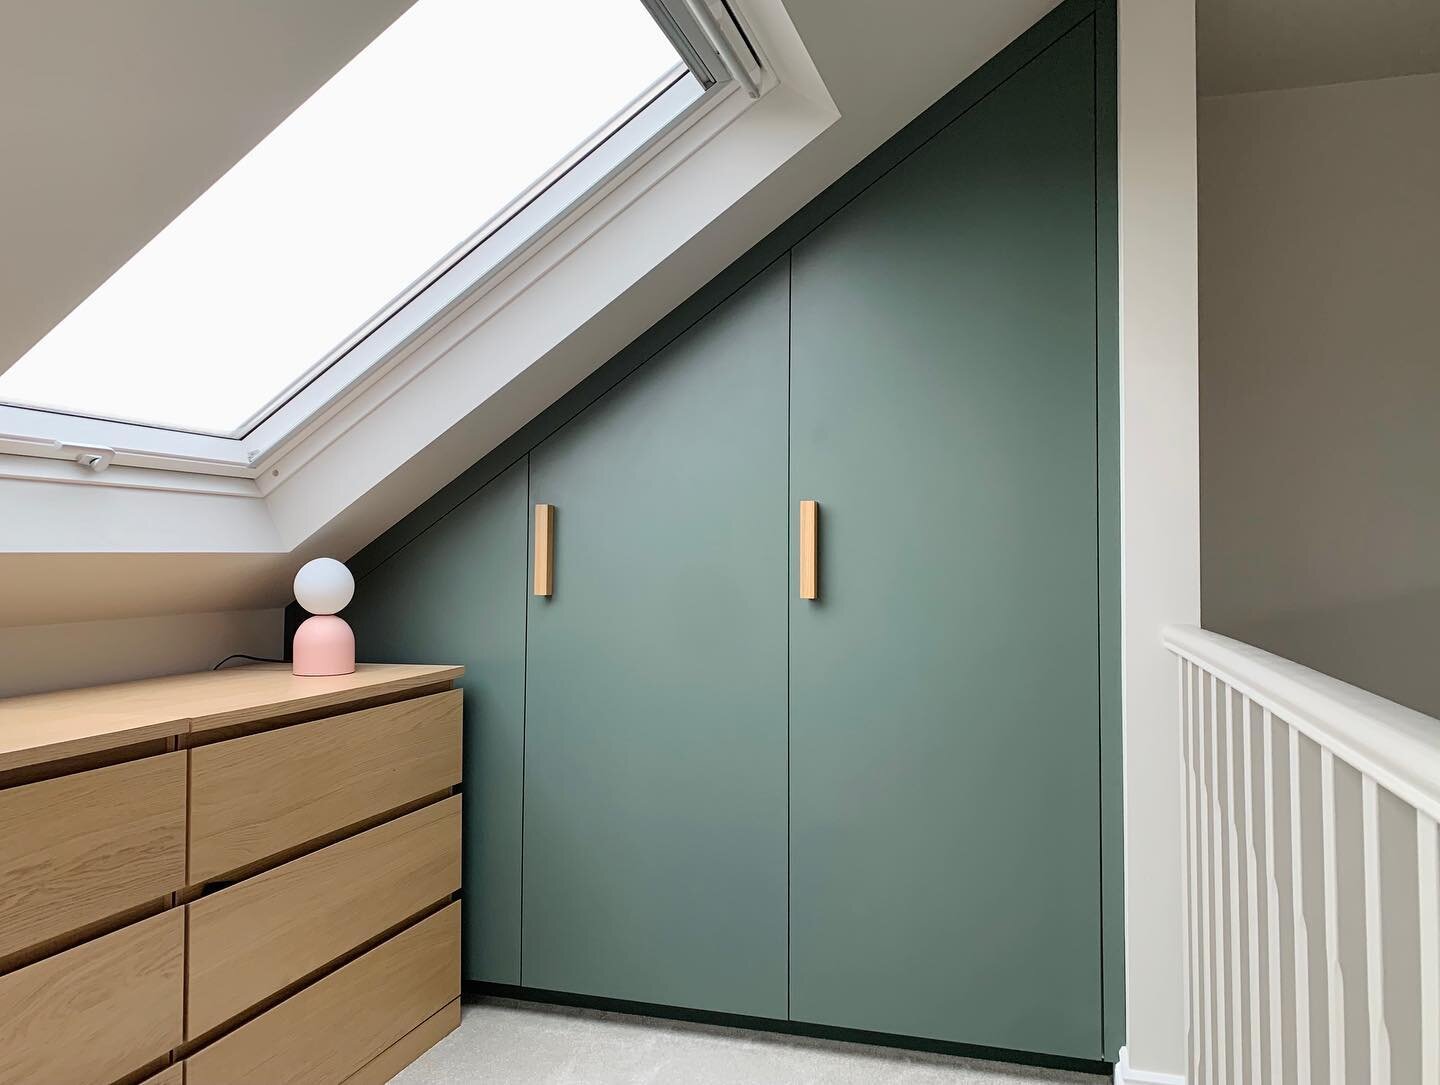 Finished this fitted wardrobe recently in a loft conversion, the green #formica laminated doors came out well, good use of space too